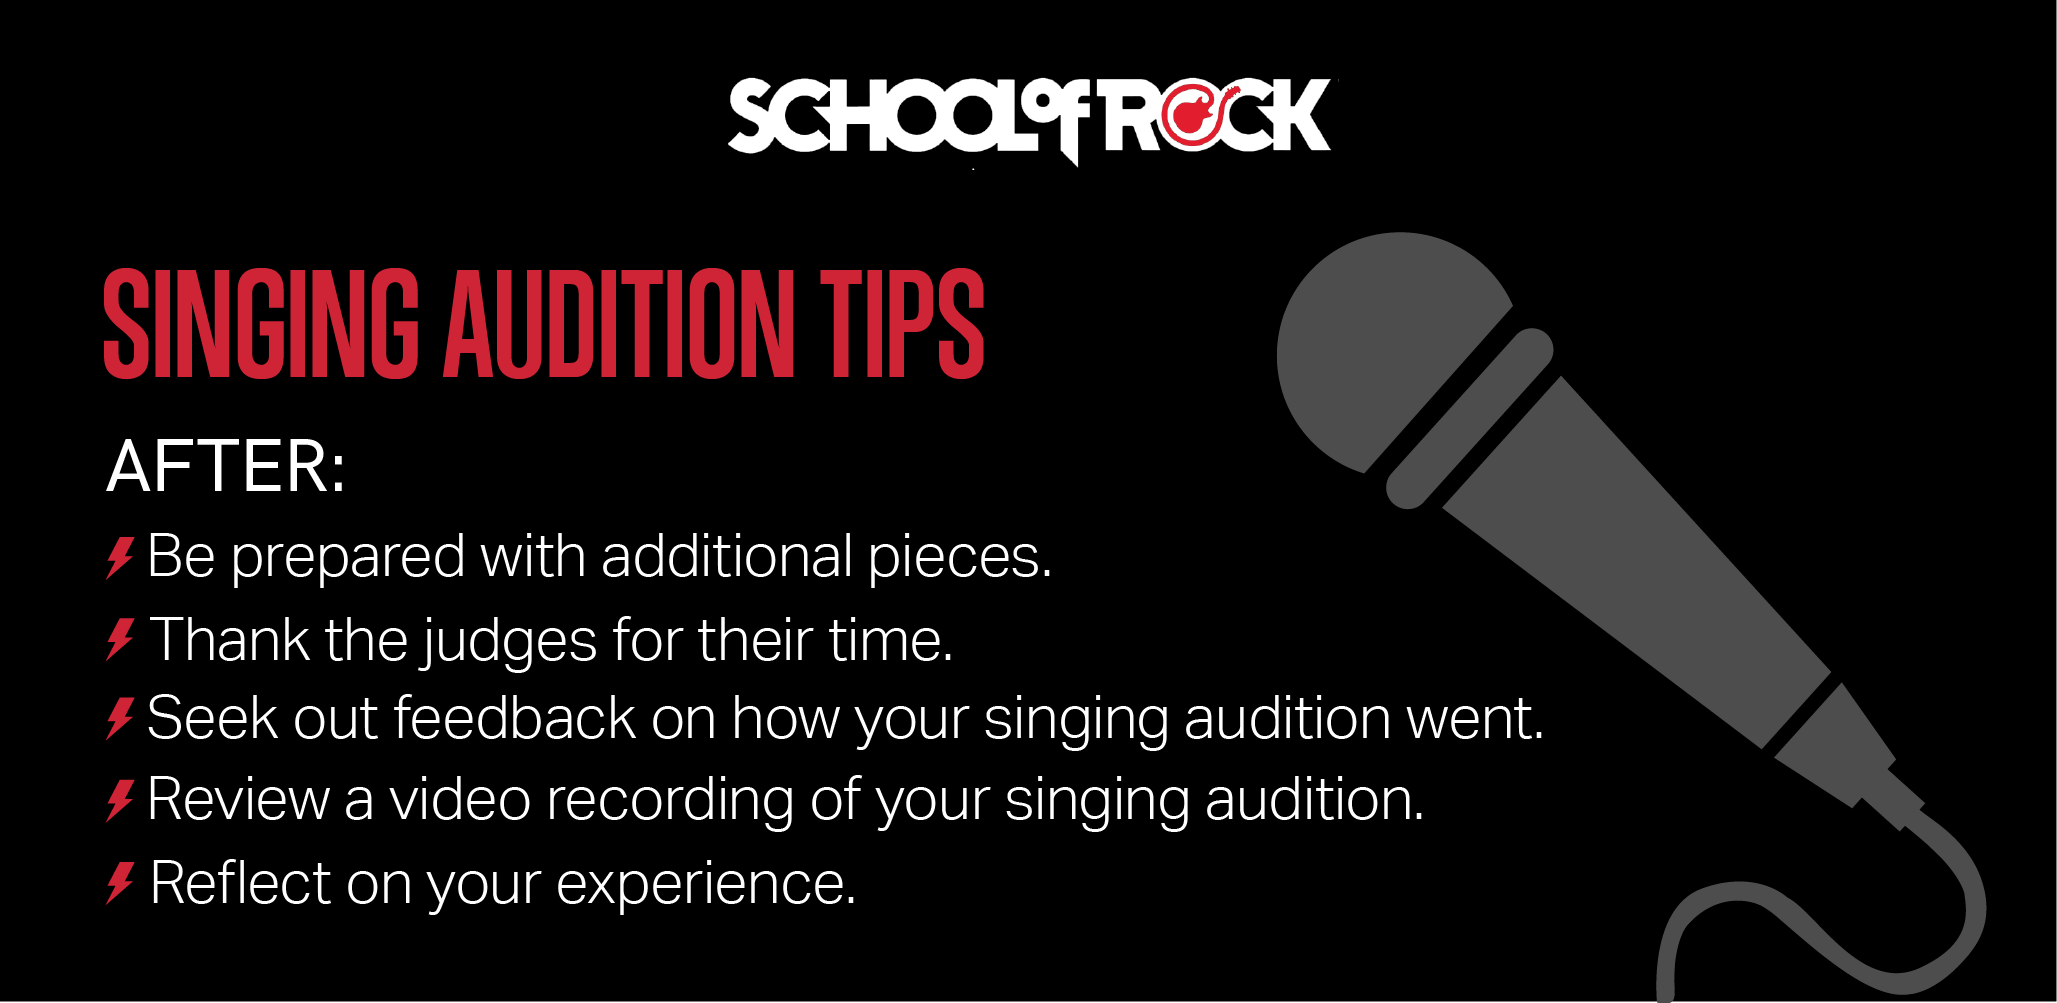 tips for after a singing audition